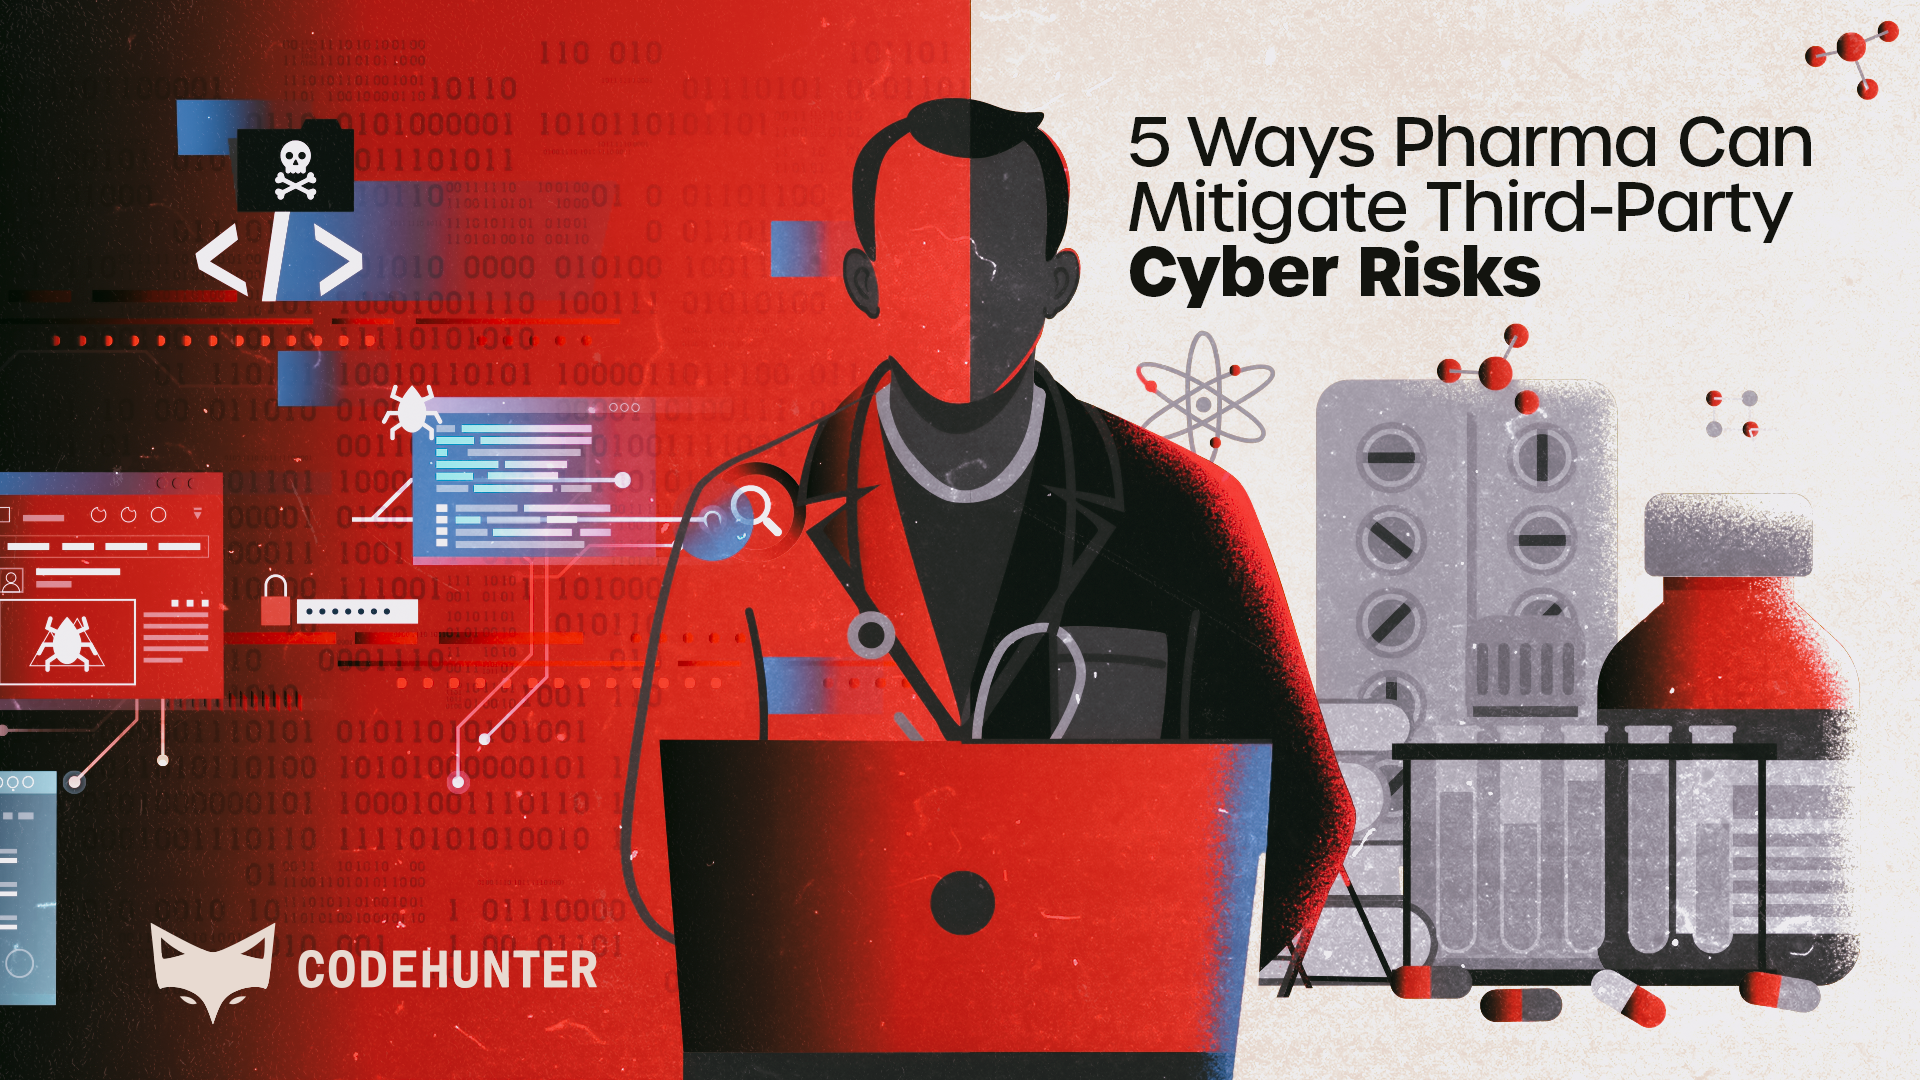 5 Ways Pharma Can Mitigate Third-Party Cyber Risks